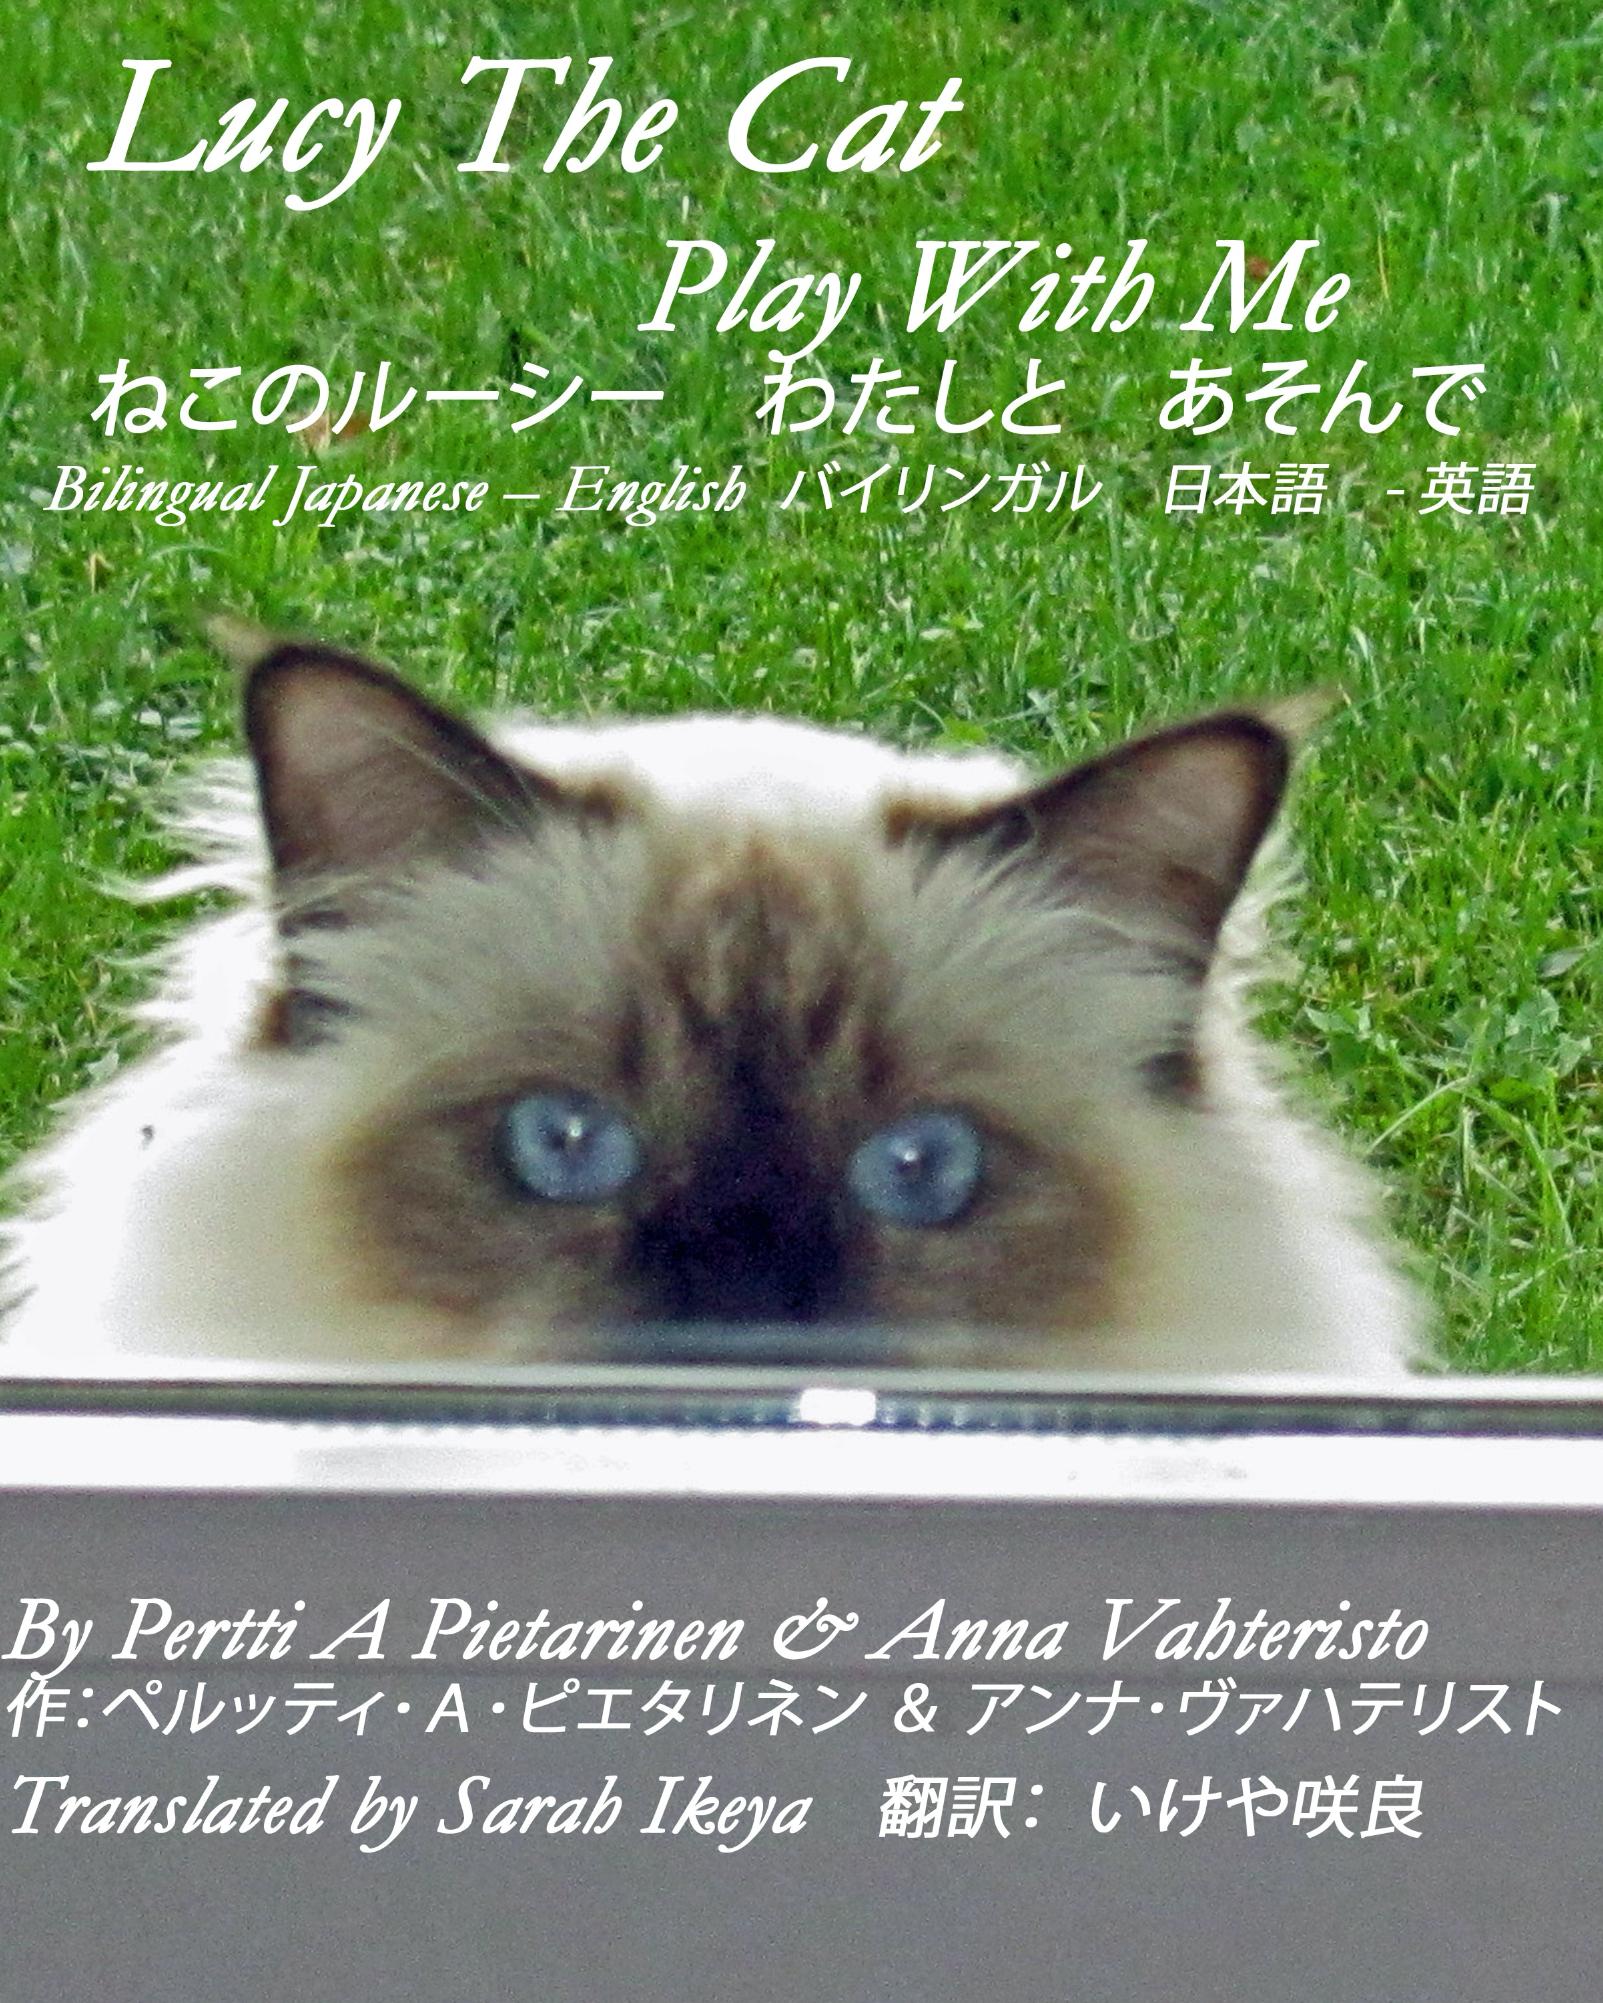 FREE: Lucy The Cat Play With Me Bilingual Japanese – English by Pertti A Pietarinen